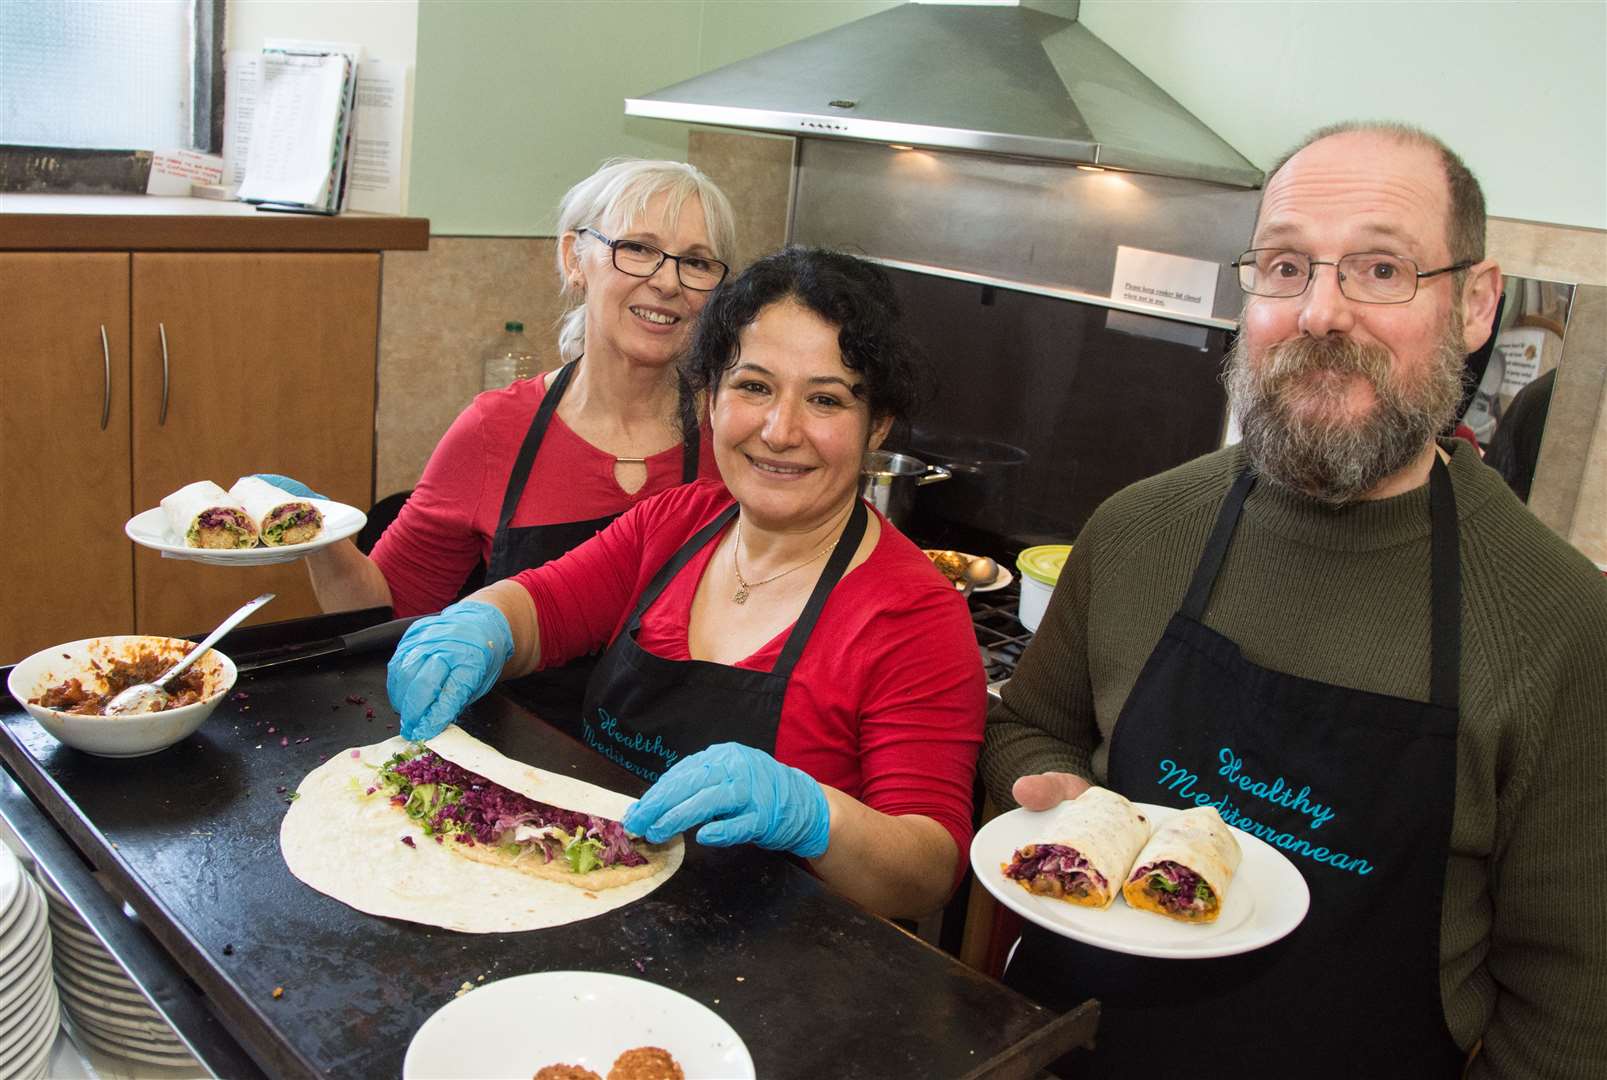 Wendy Robertson, Medine Duff and Eddie Duff serving and preparing food for the Mediterranean pop-up cafe.